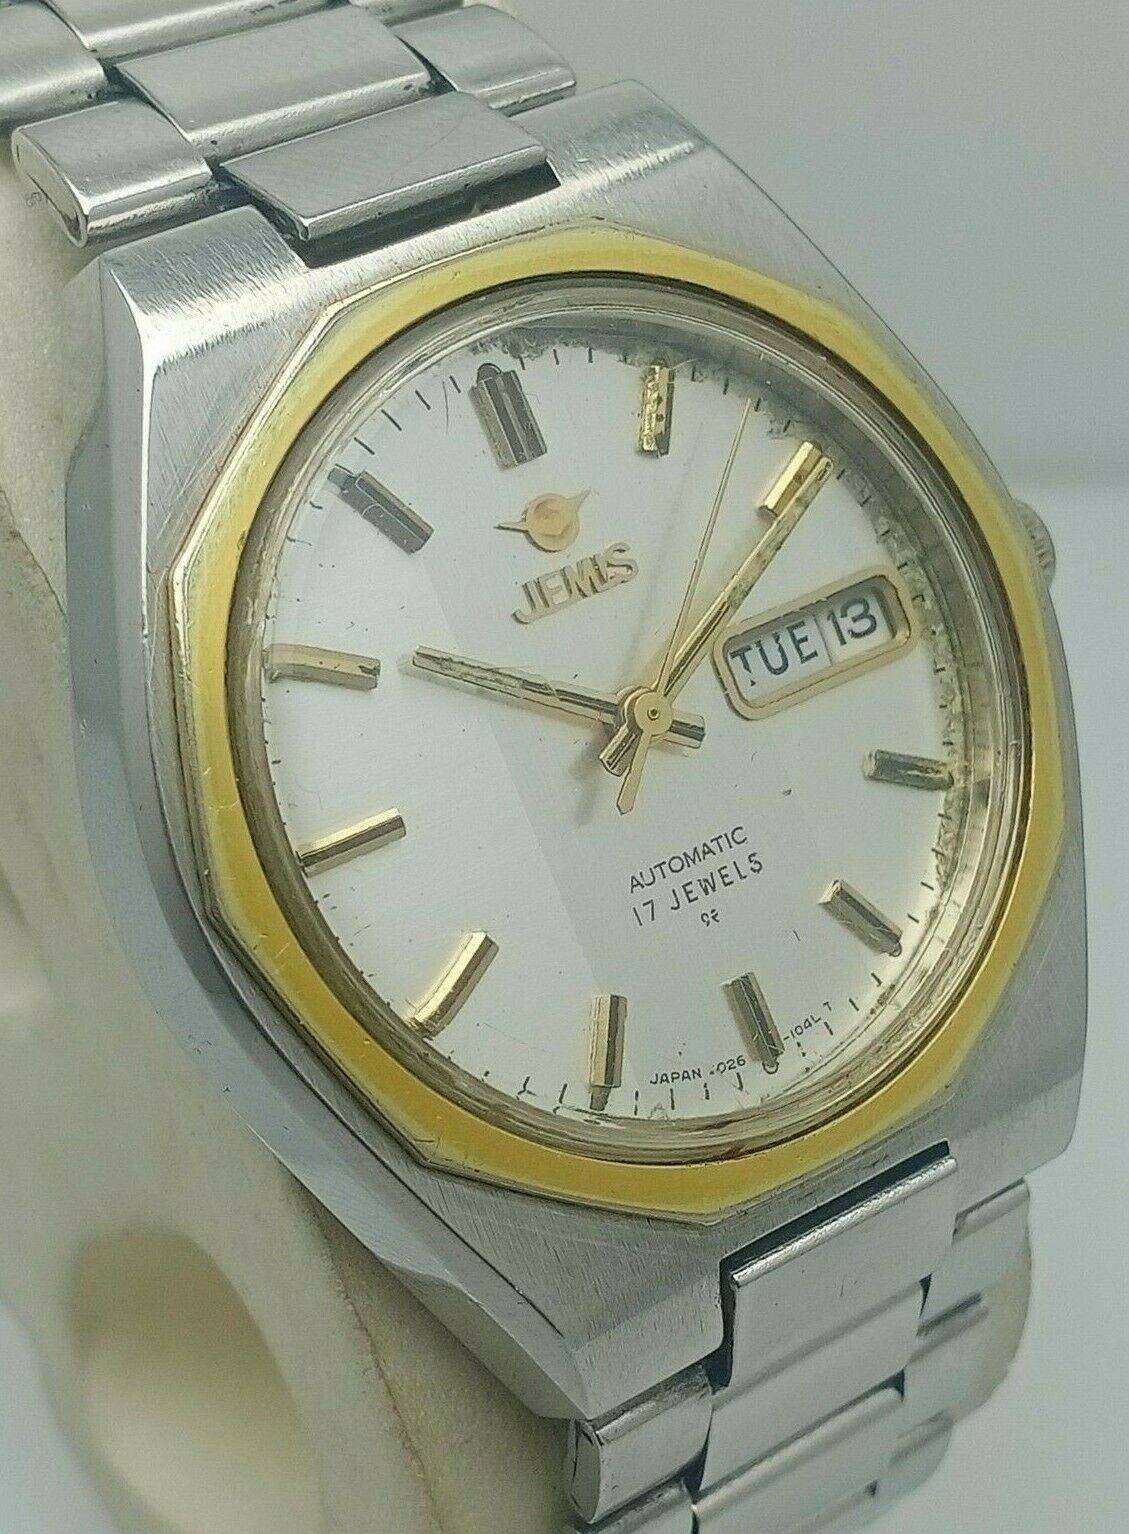 Vintage Jemis 5021-0240 Automatic Day/Date Watch